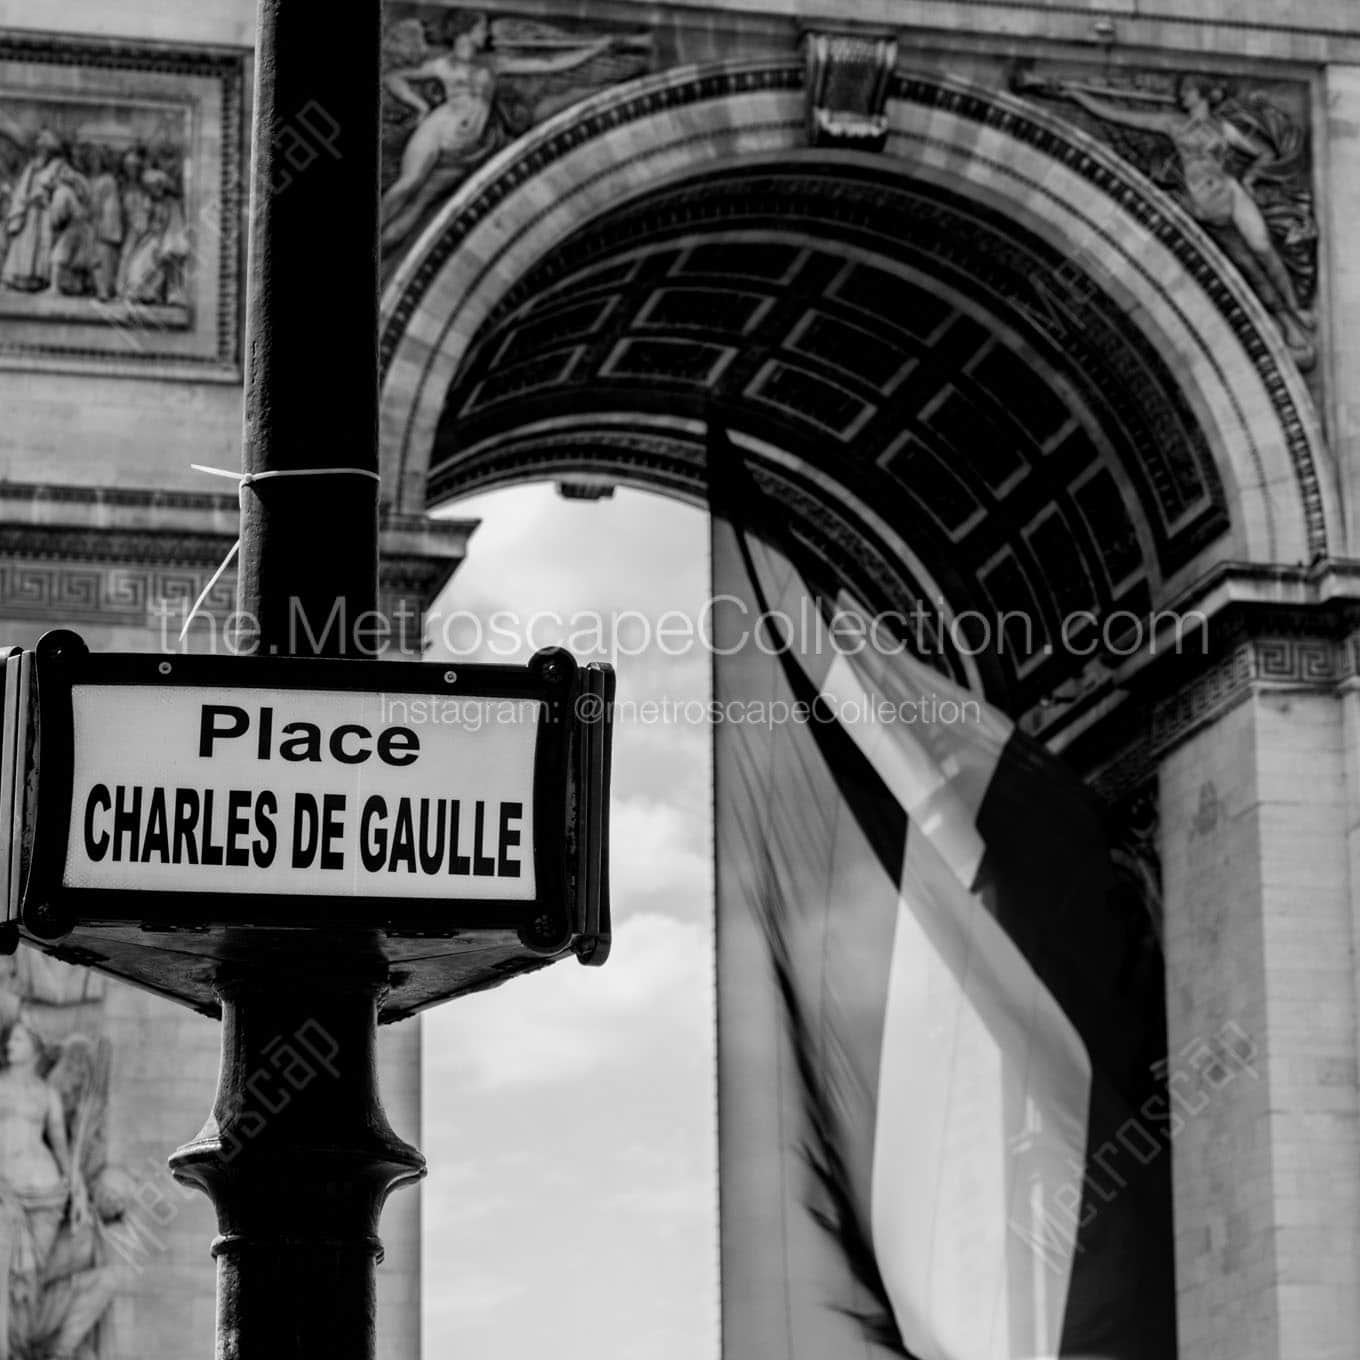 palace charles de gaulle sign Black & White Office Art